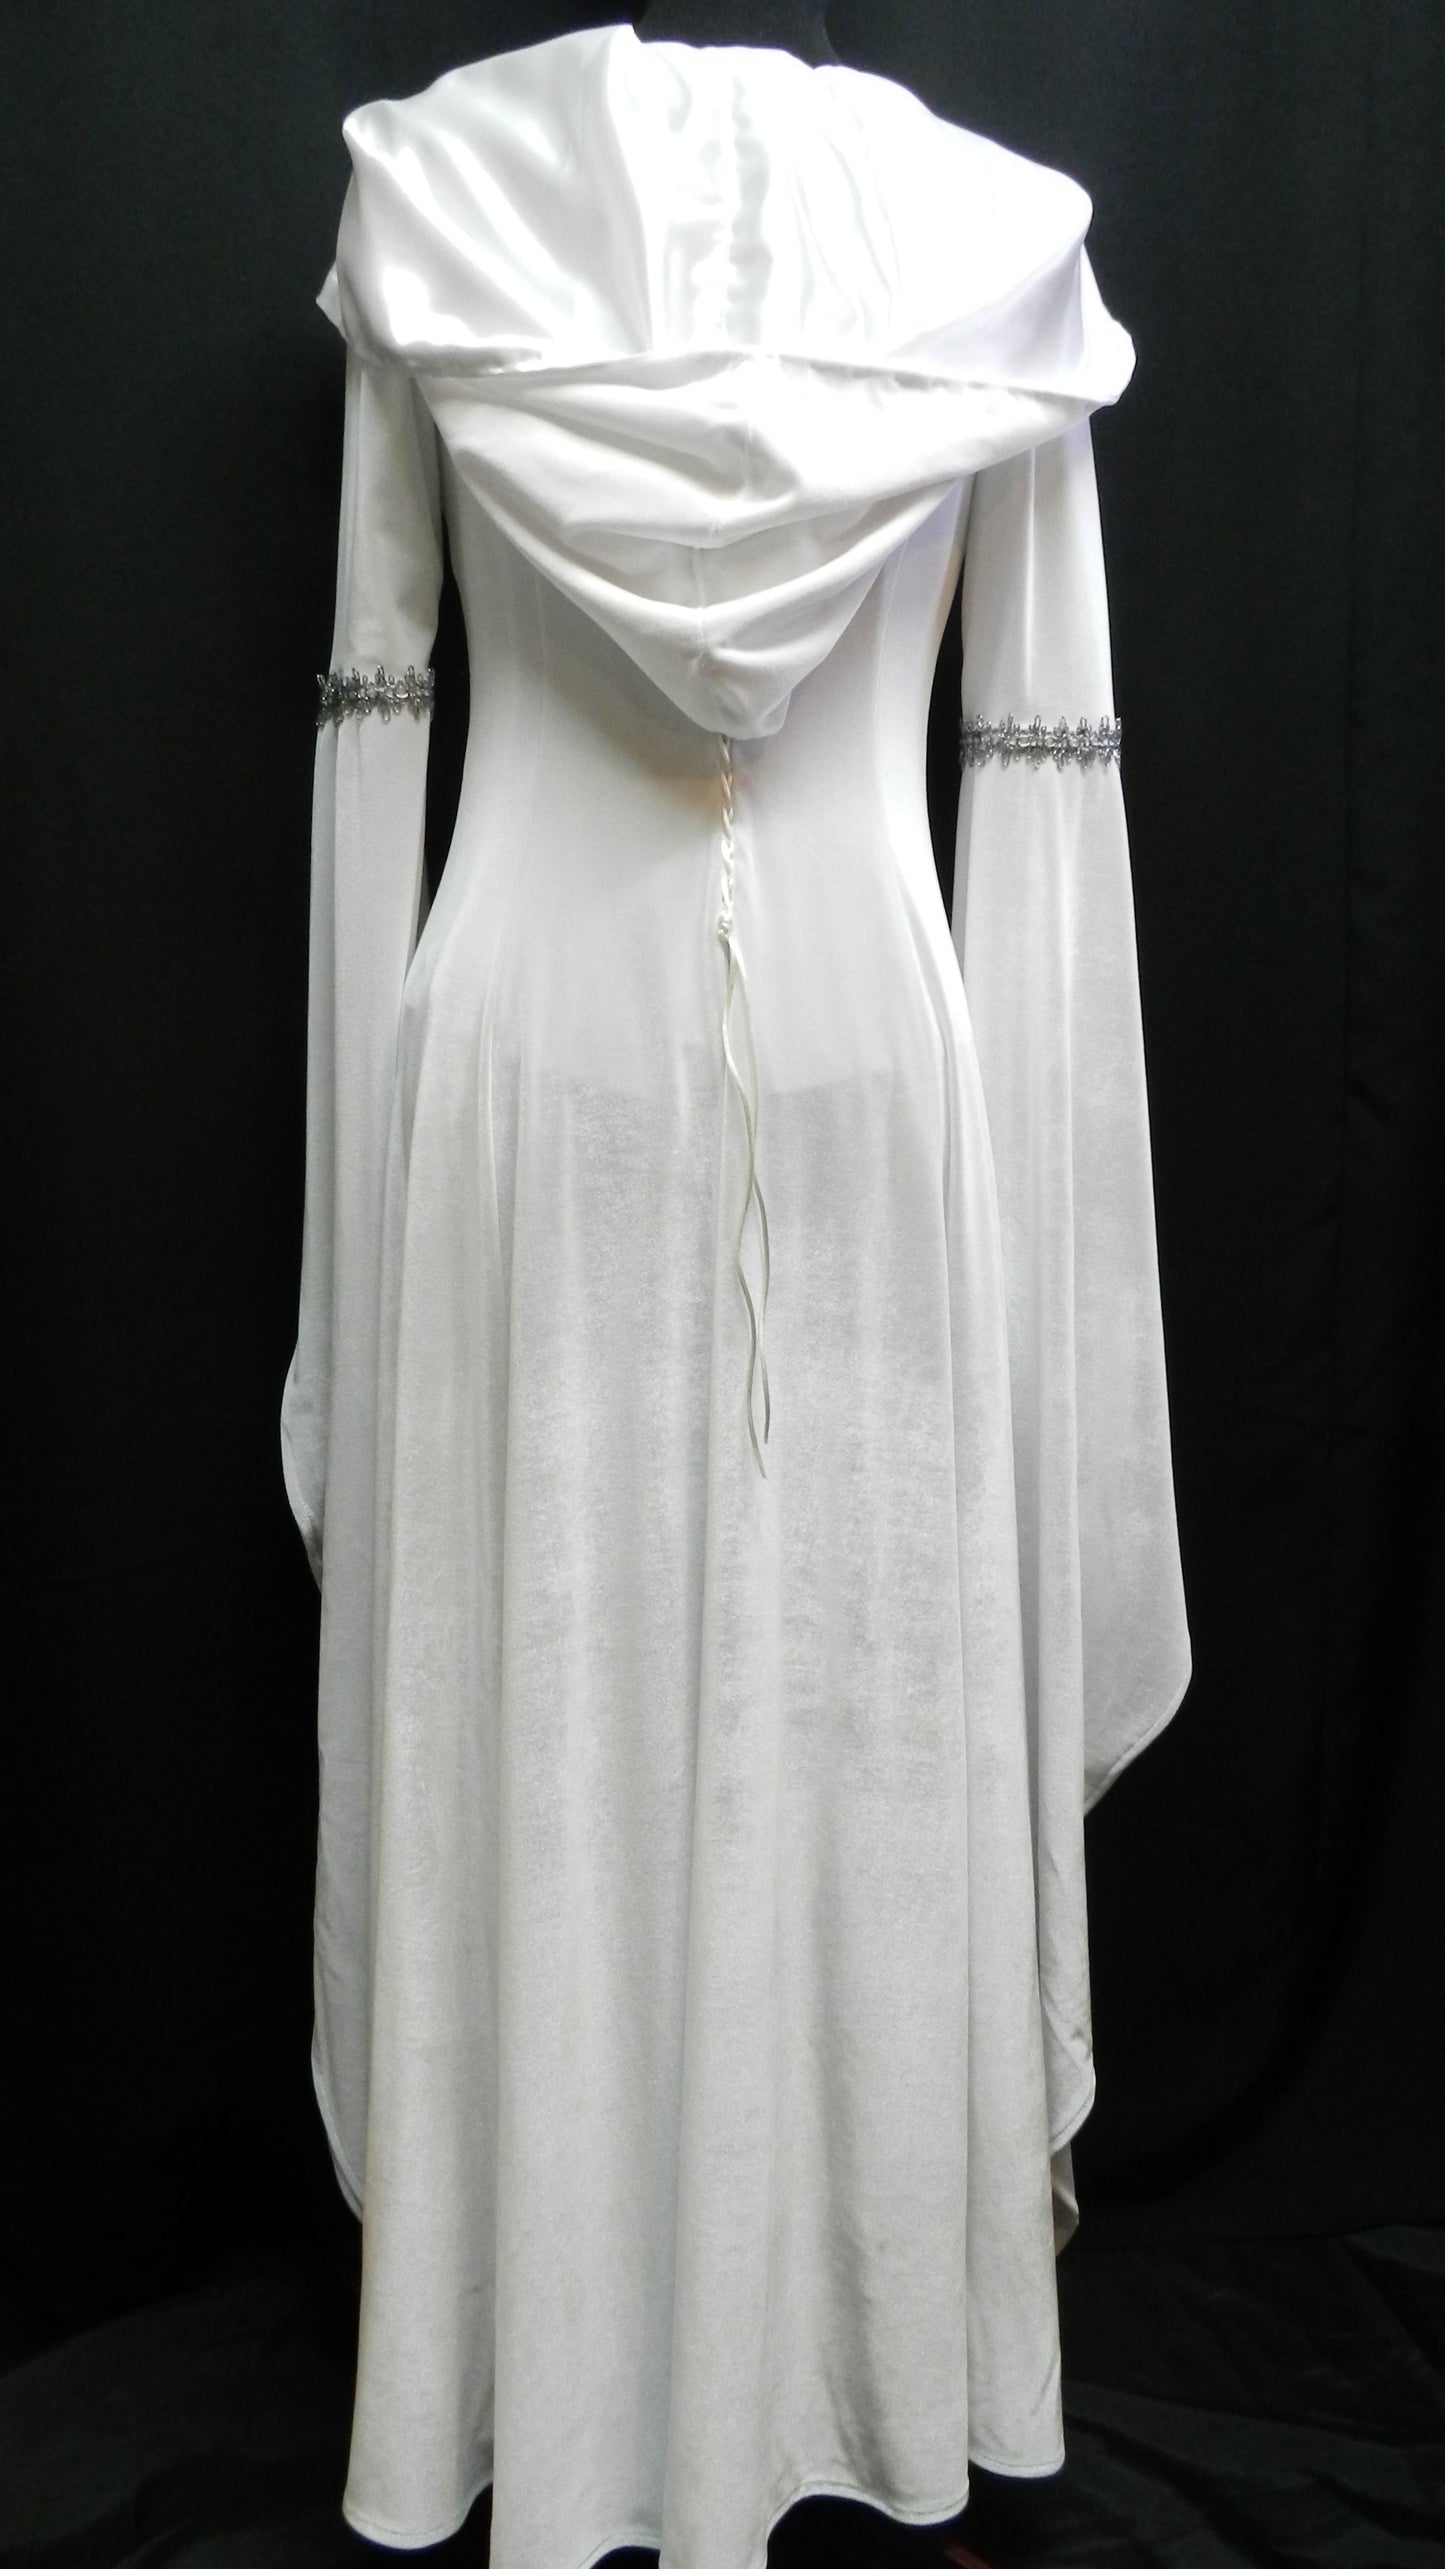 Reserved to Nicolas Inspired by Legend of the Seeker Kahlan's white shirt confessor custom made to your size!